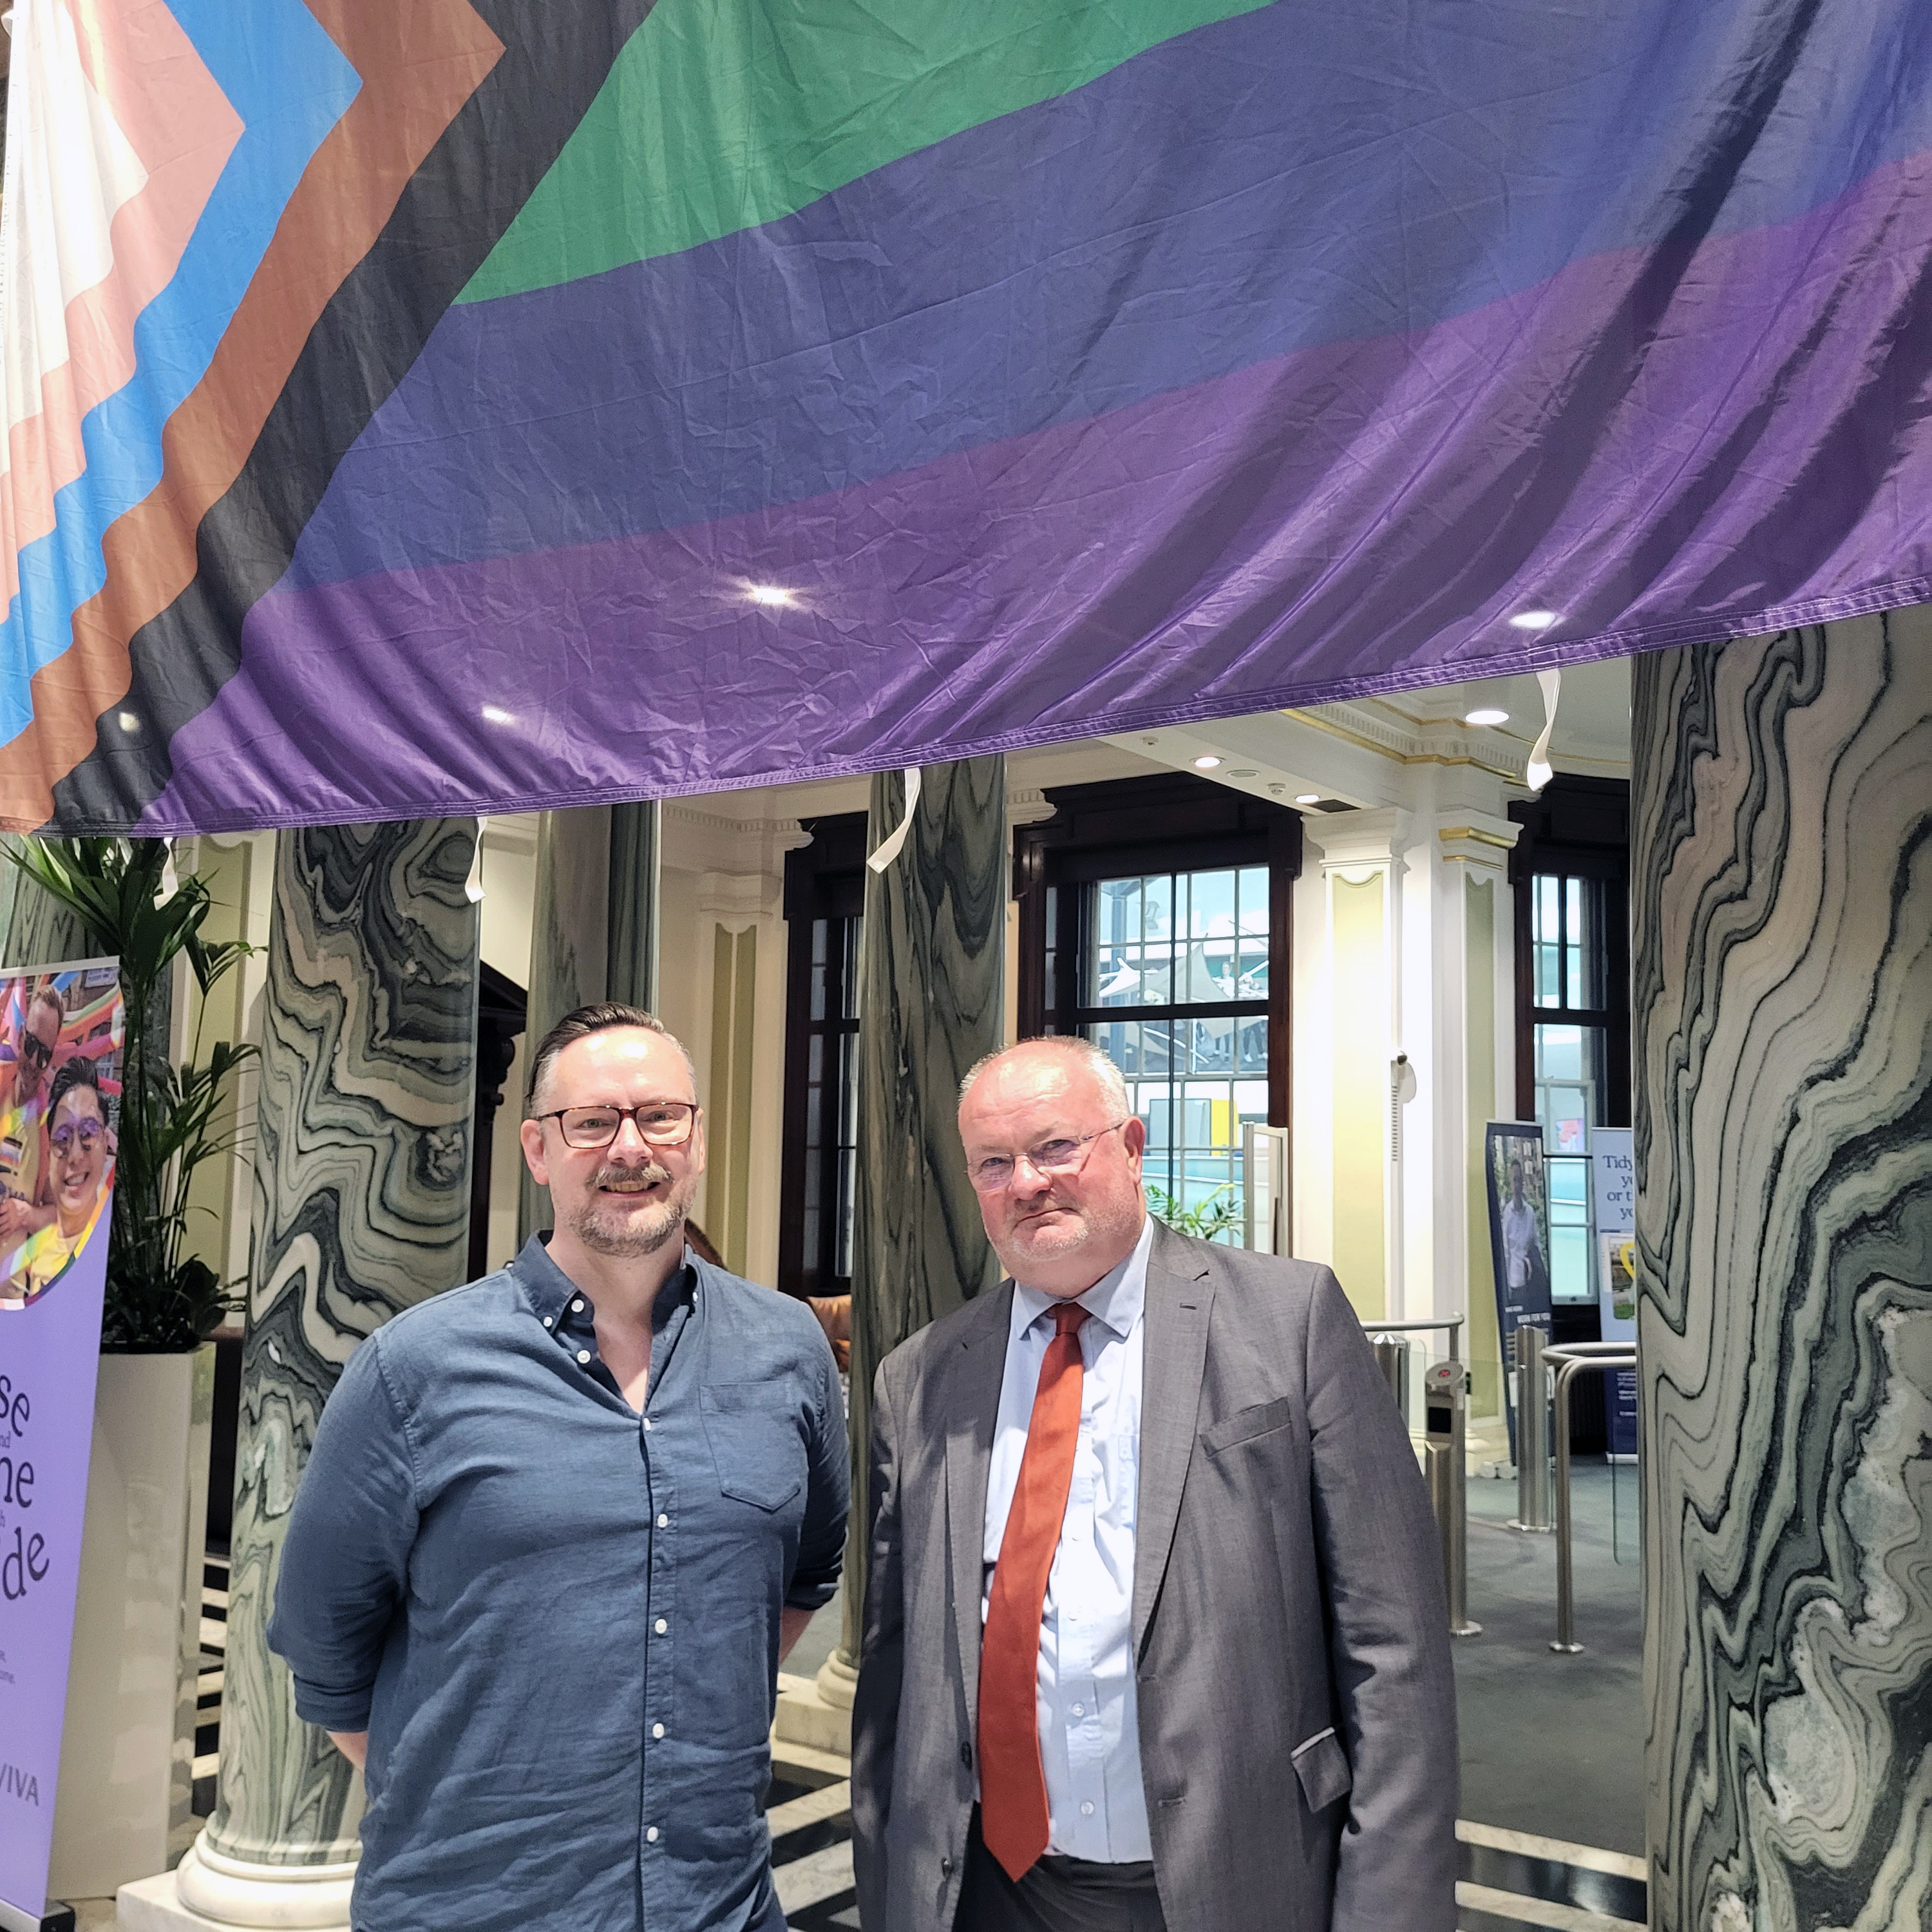 Robert George from Norwich Pride, and Piers Marlow from First Bus standing in front of a progress pride flag